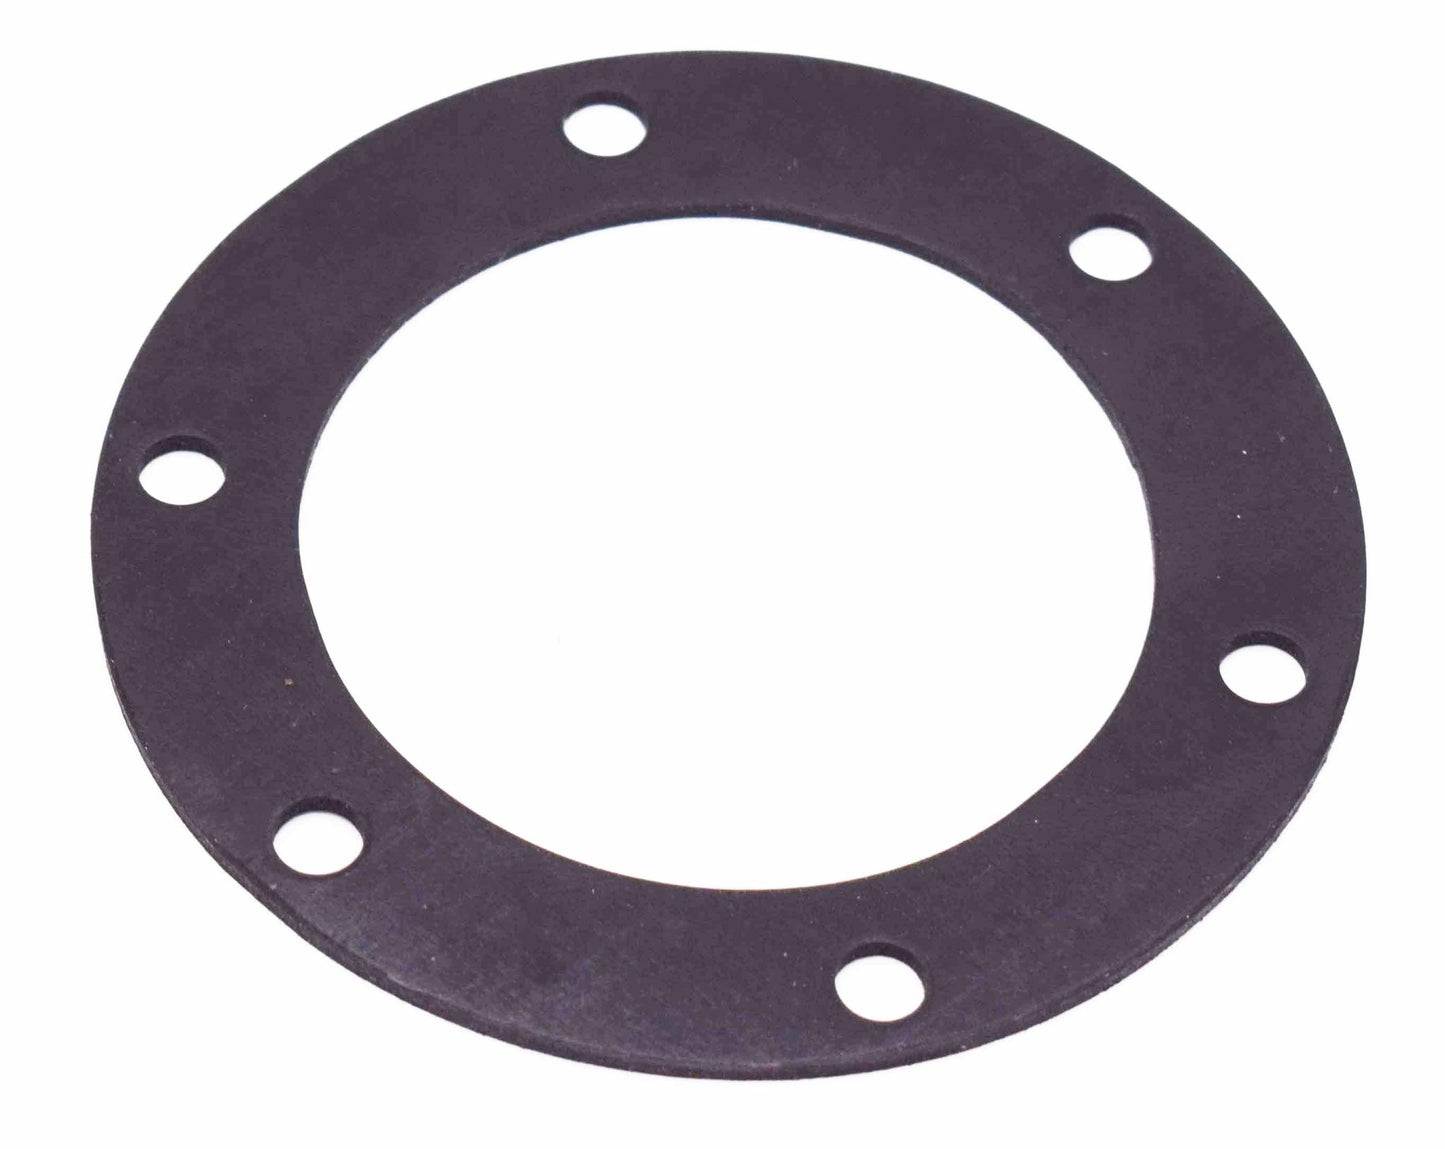 Gasket, Filler Hose To Body, 1967-1971 Jeepster Commando - The JeepsterMan